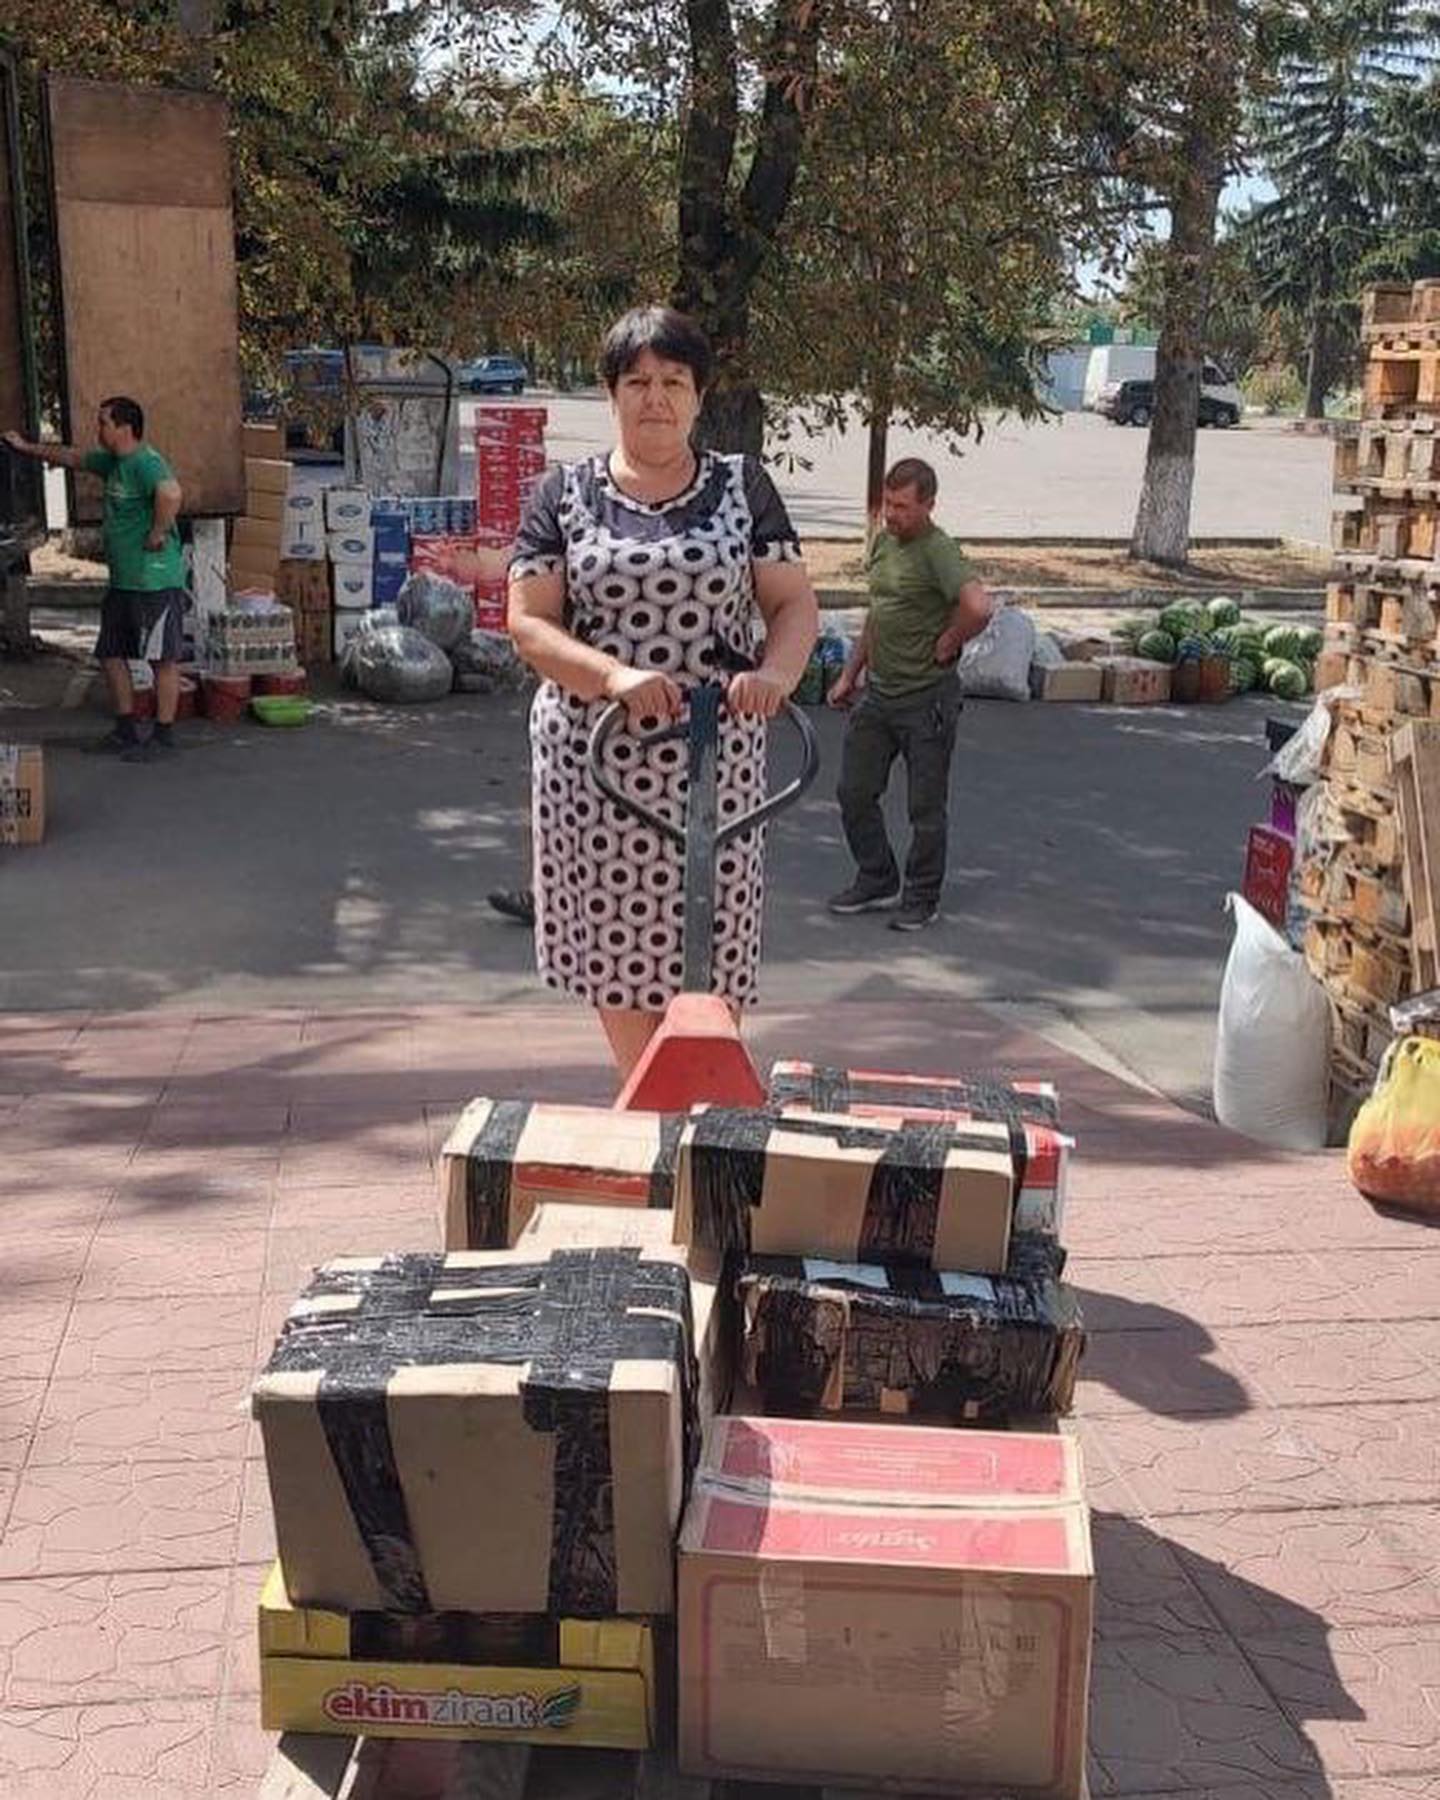 A woman pushing a cart full of boxes.